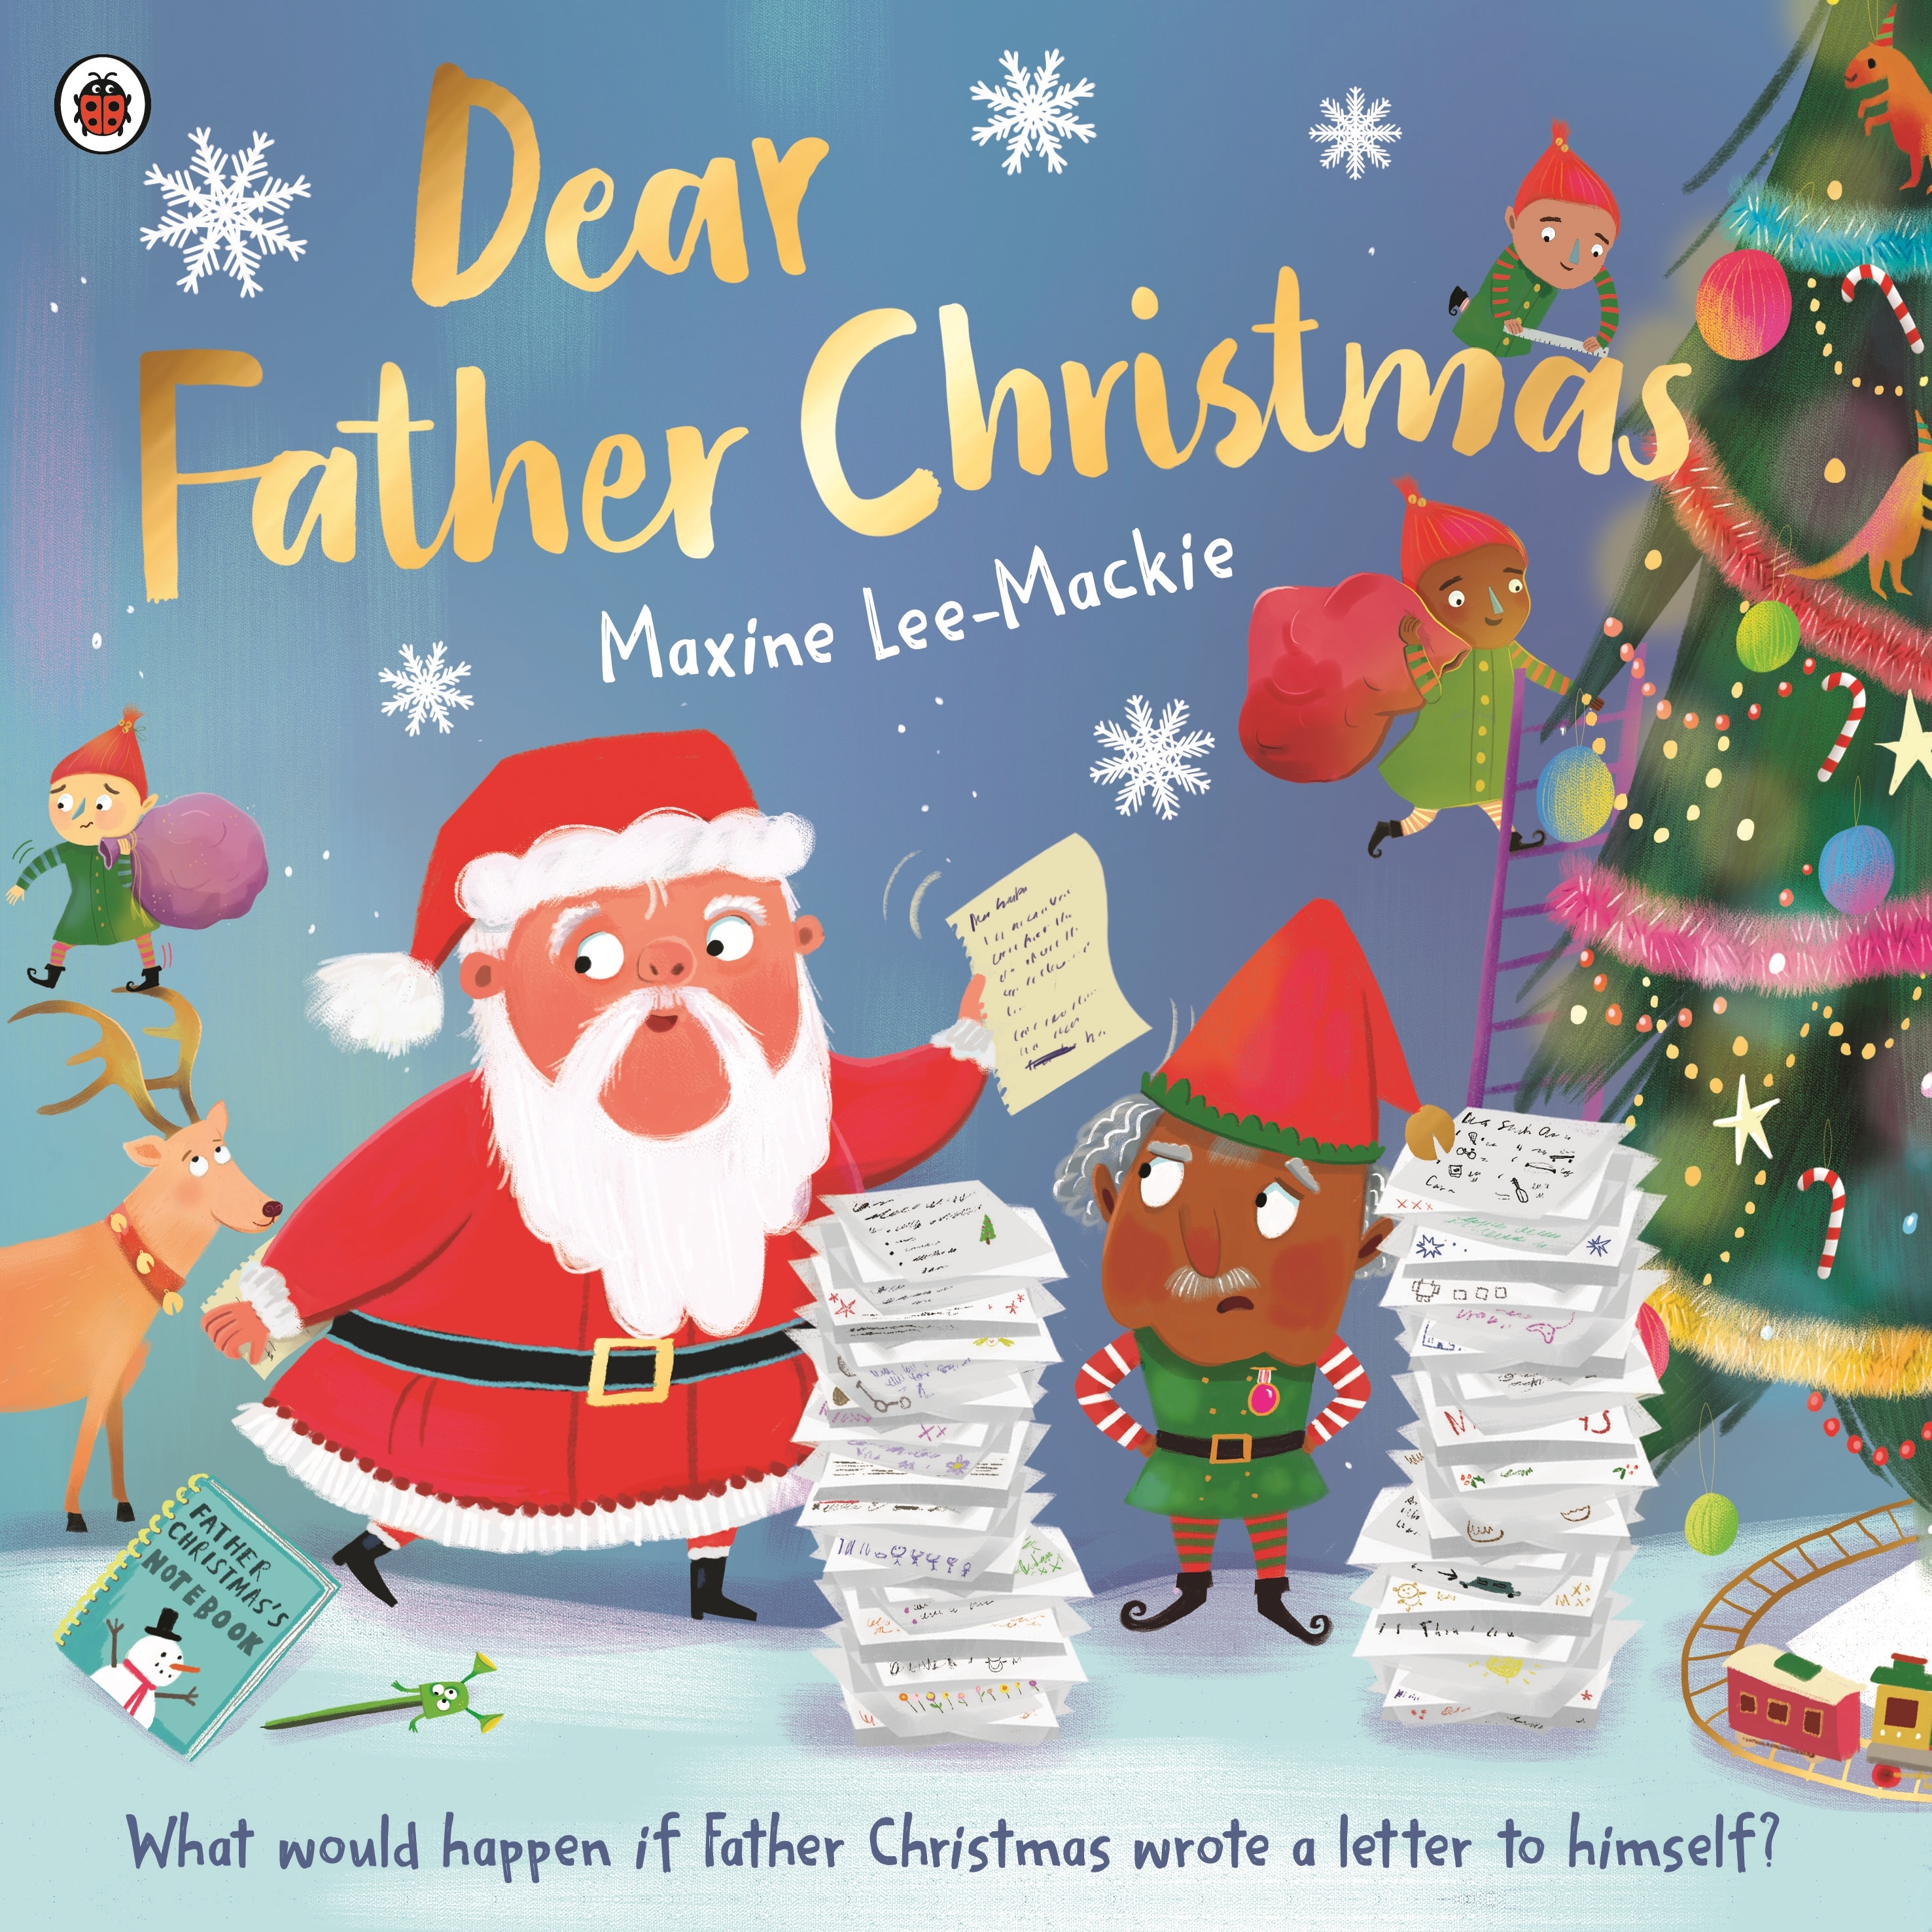 Book “Dear Father Christmas” by Maxine Lee-Mackie — November 3, 2022